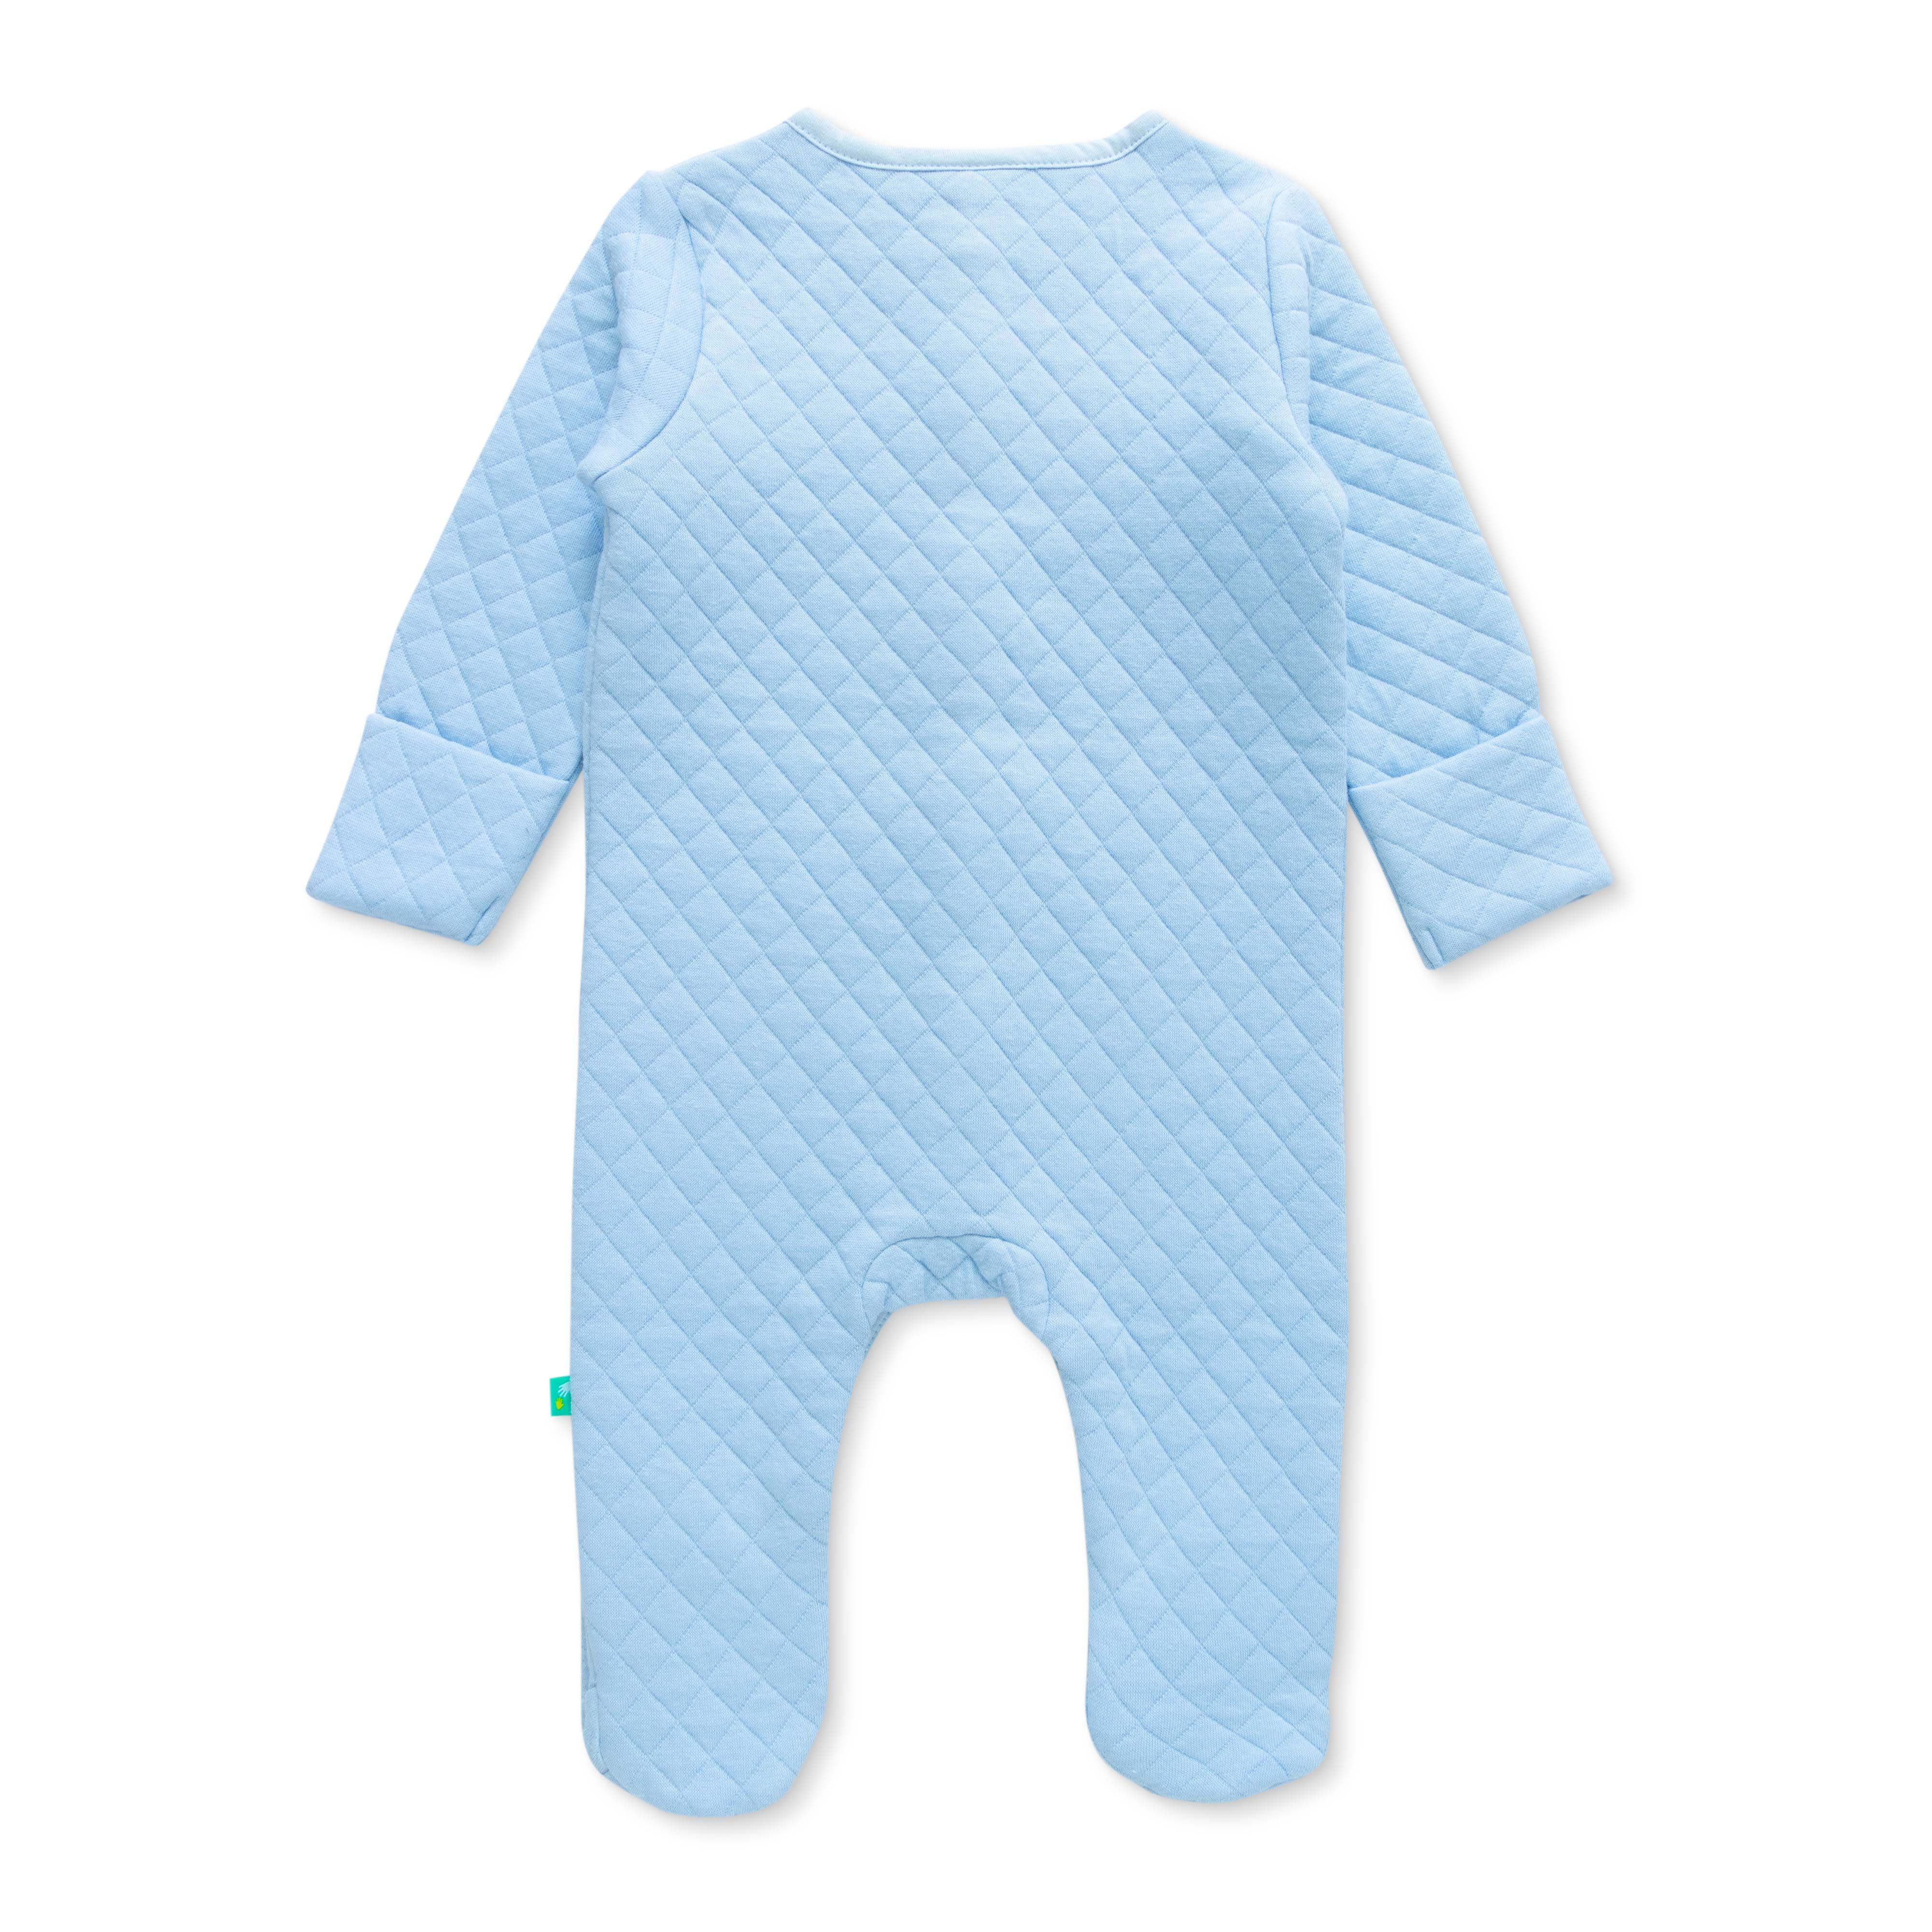 Boys Quilted Fabric Solid Blue Full Sleeve SleepSuit - Juscubs